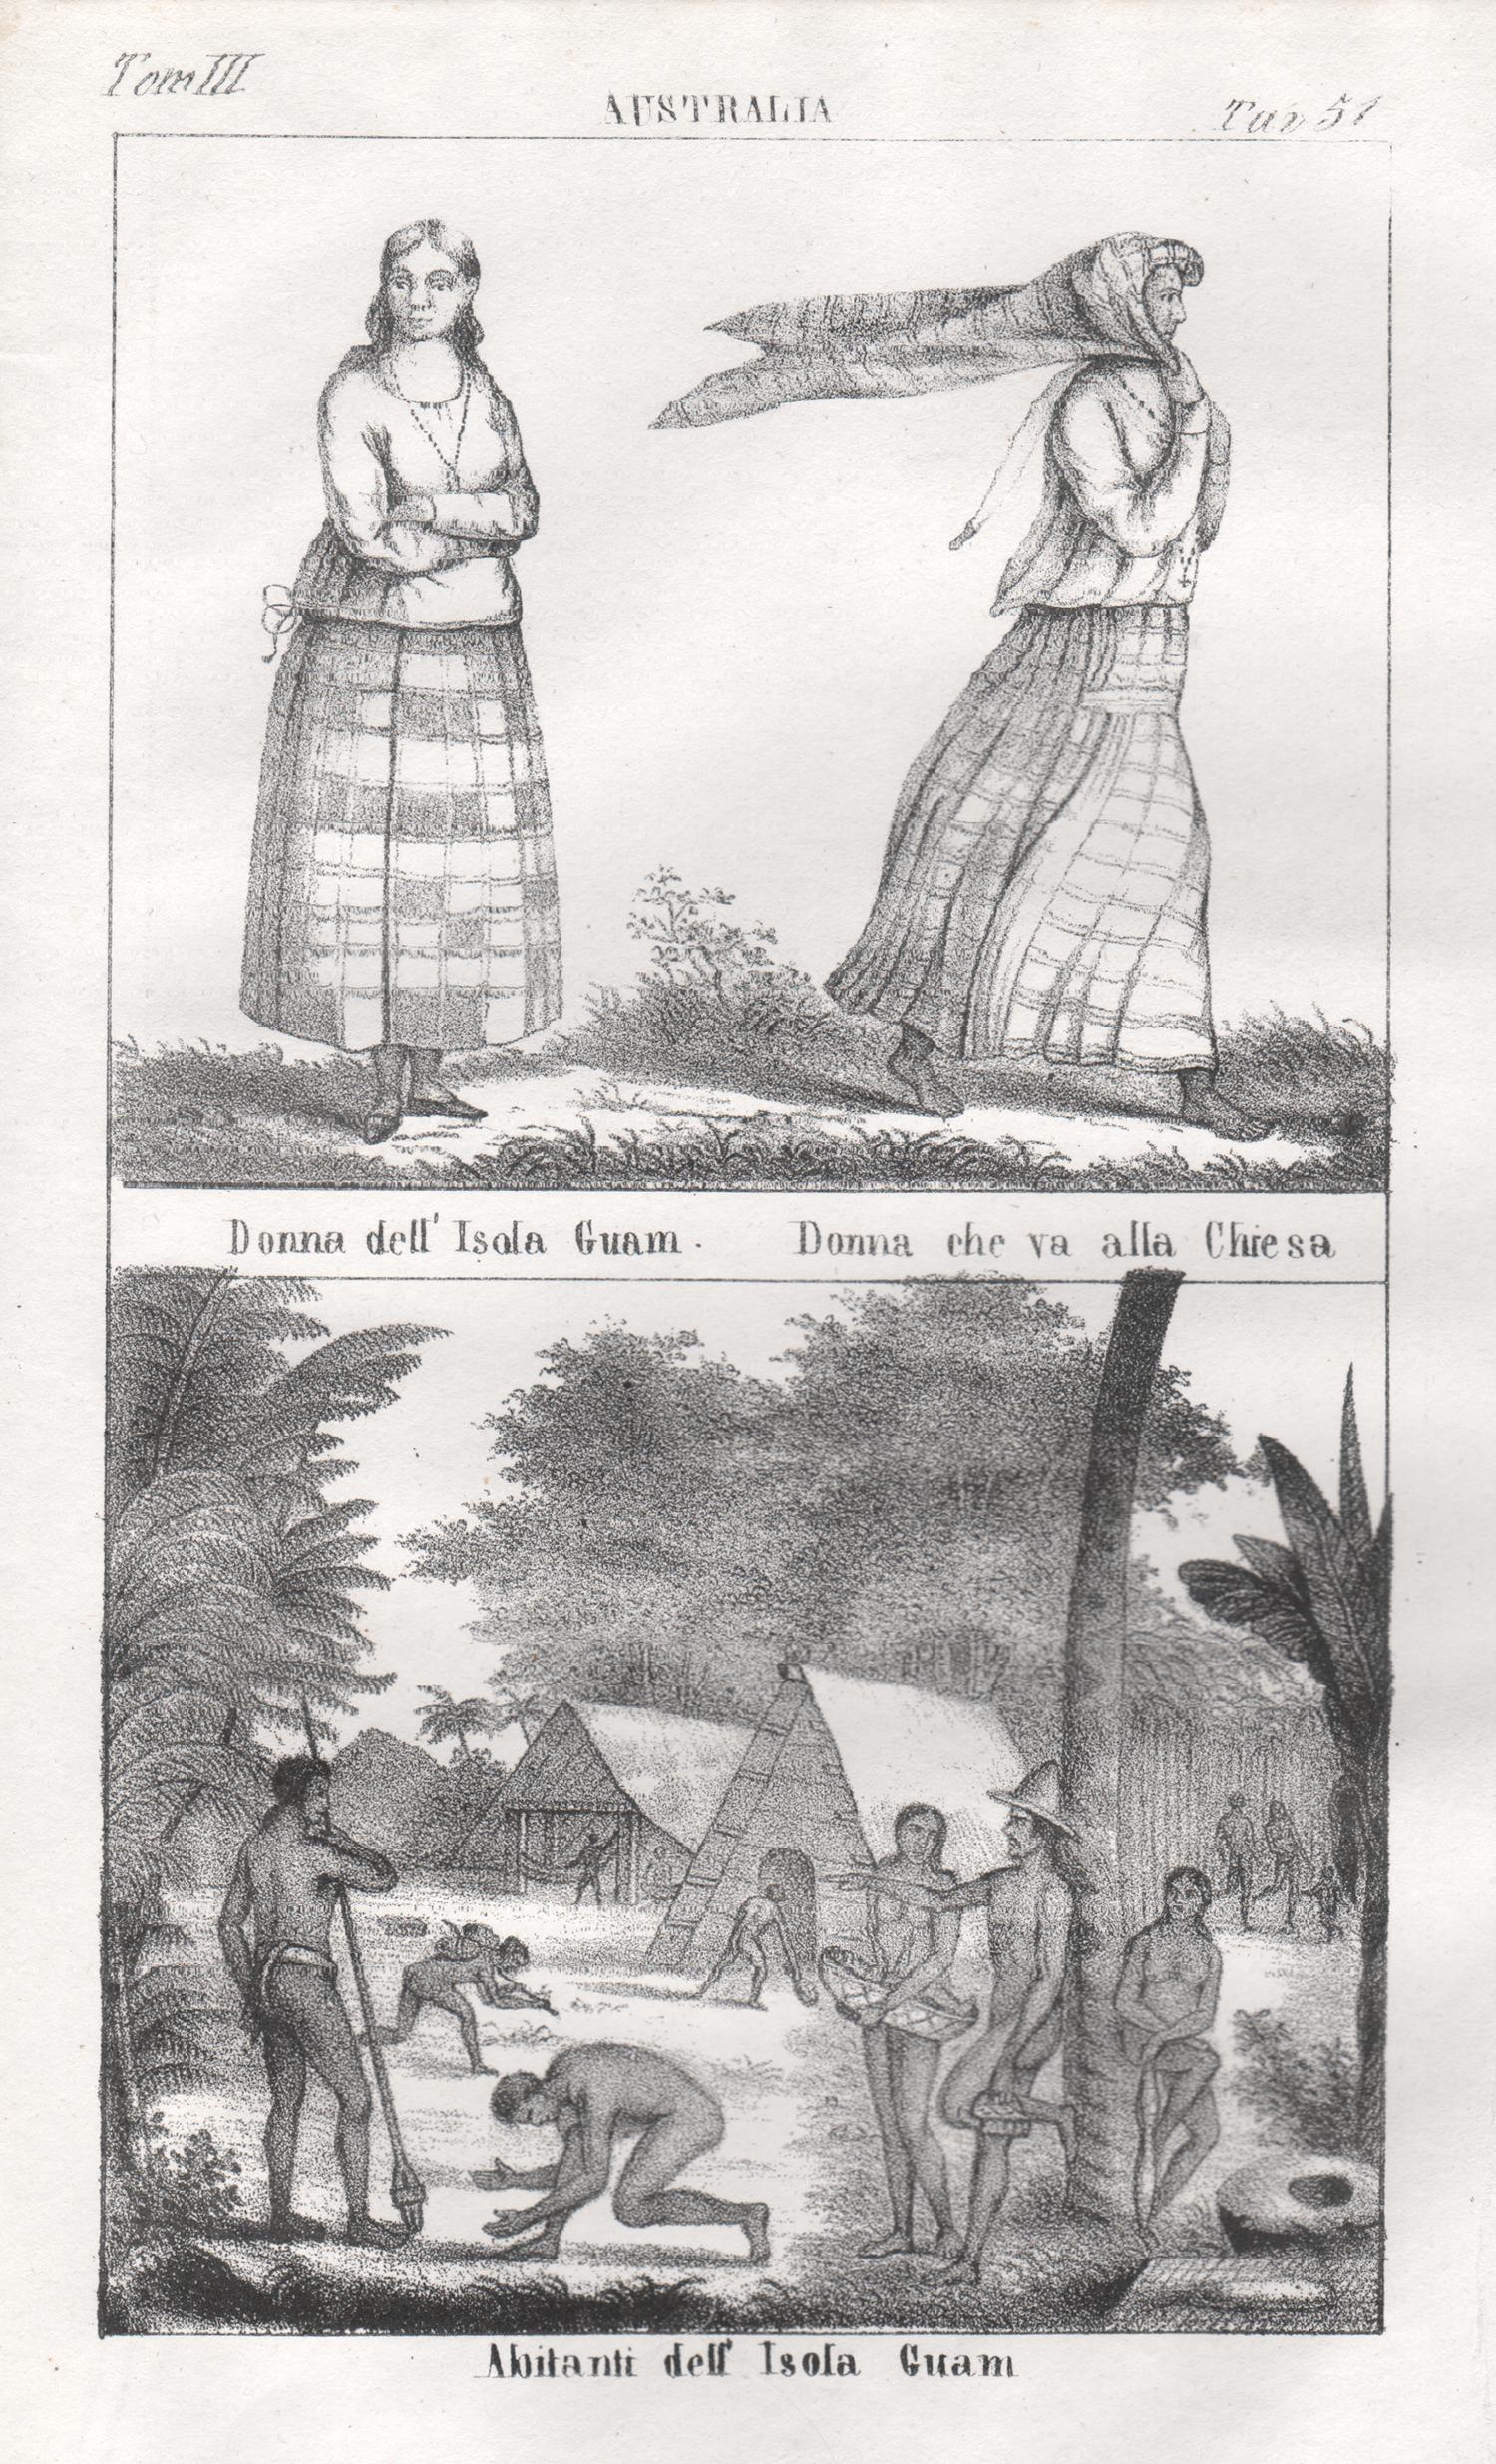 Unknown Figurative Print - Guam, Chamorros native inhabitants, mid 19th century lithograph. Oceania.